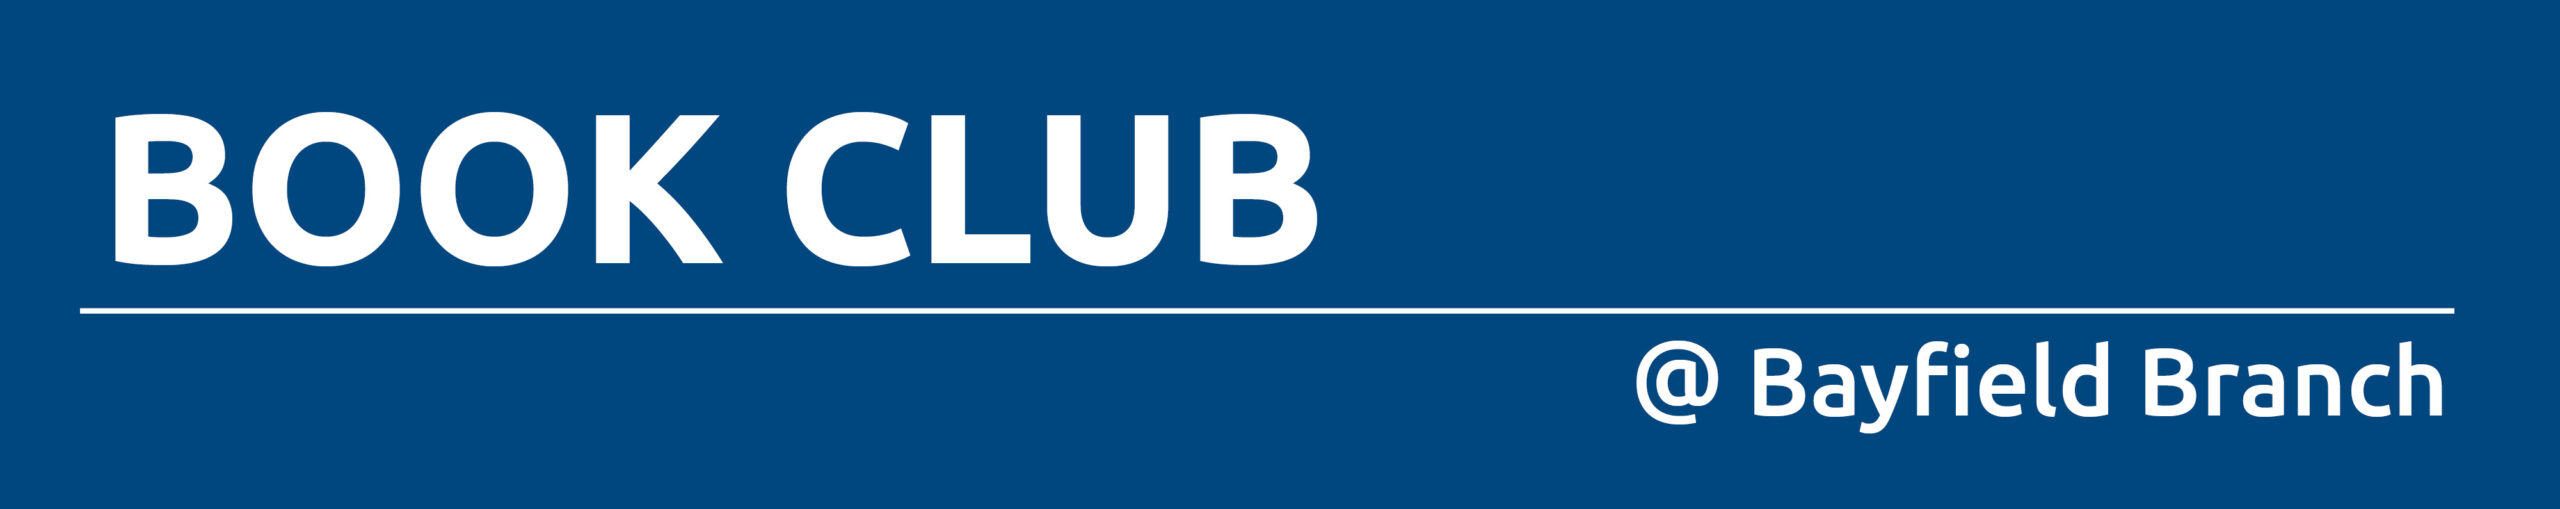 Dark blue rectangle with white text promoting book club at Bayfield